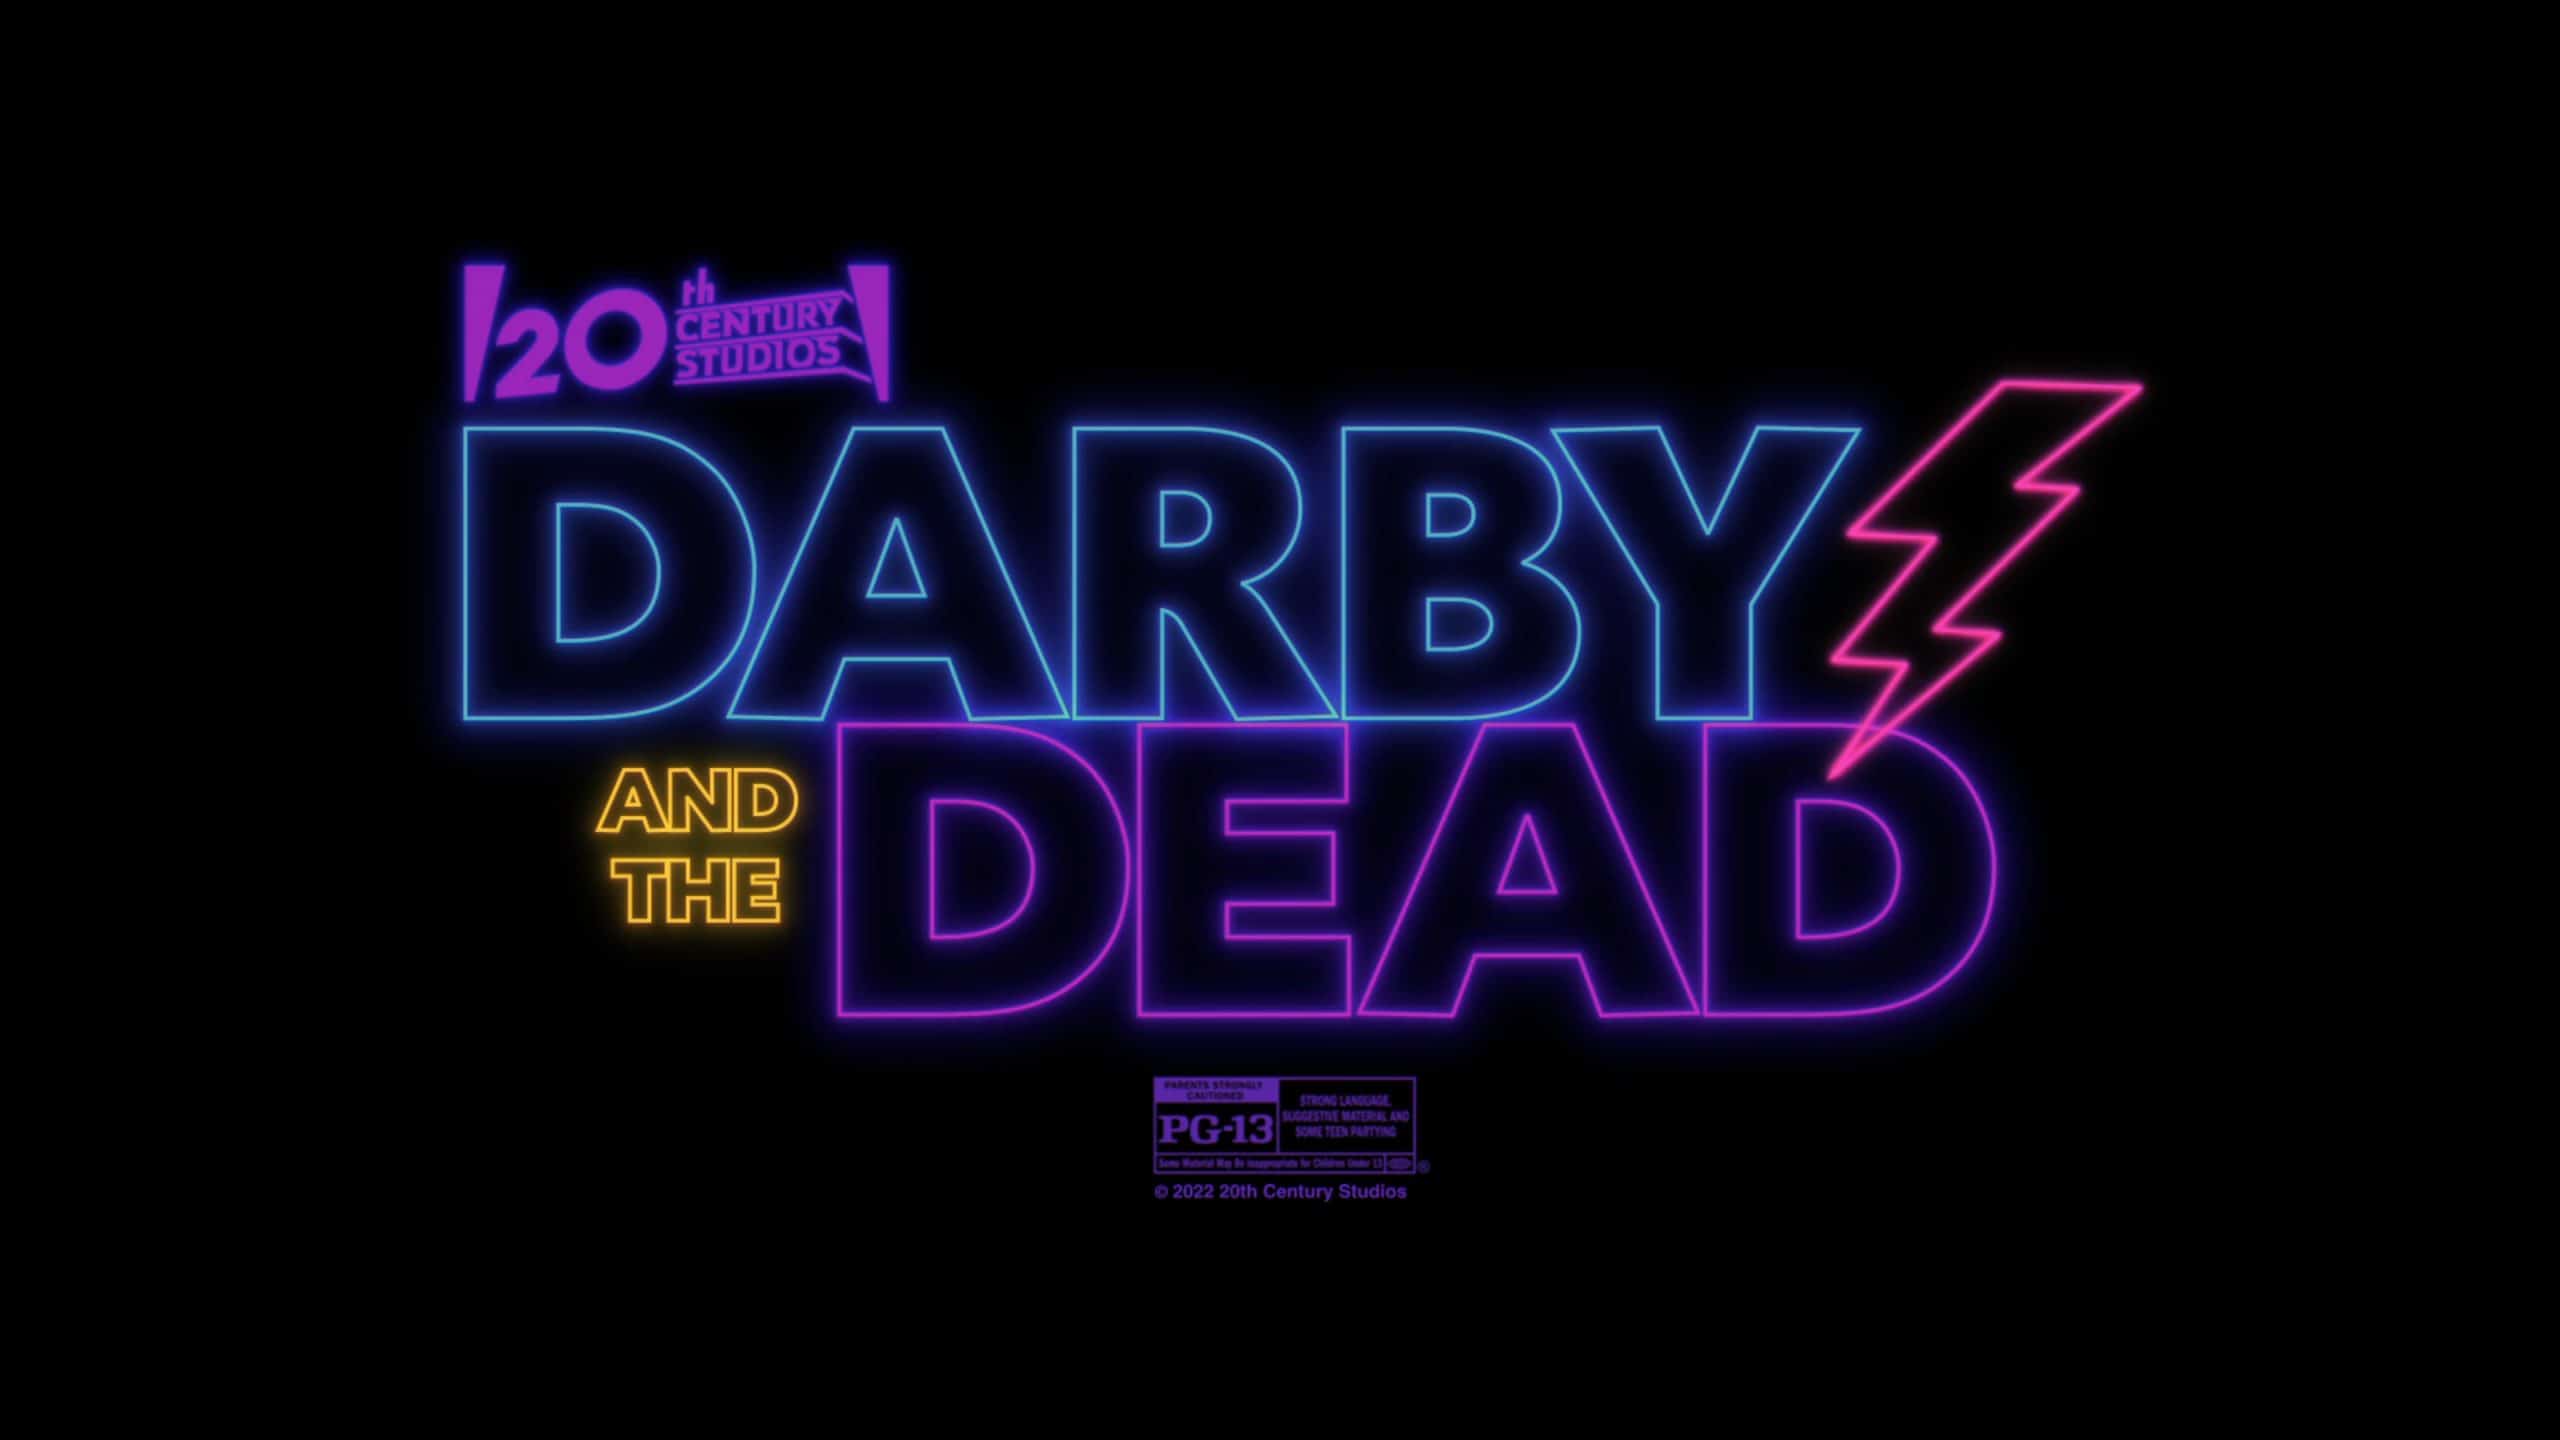 Title Card For Darby and the Dead